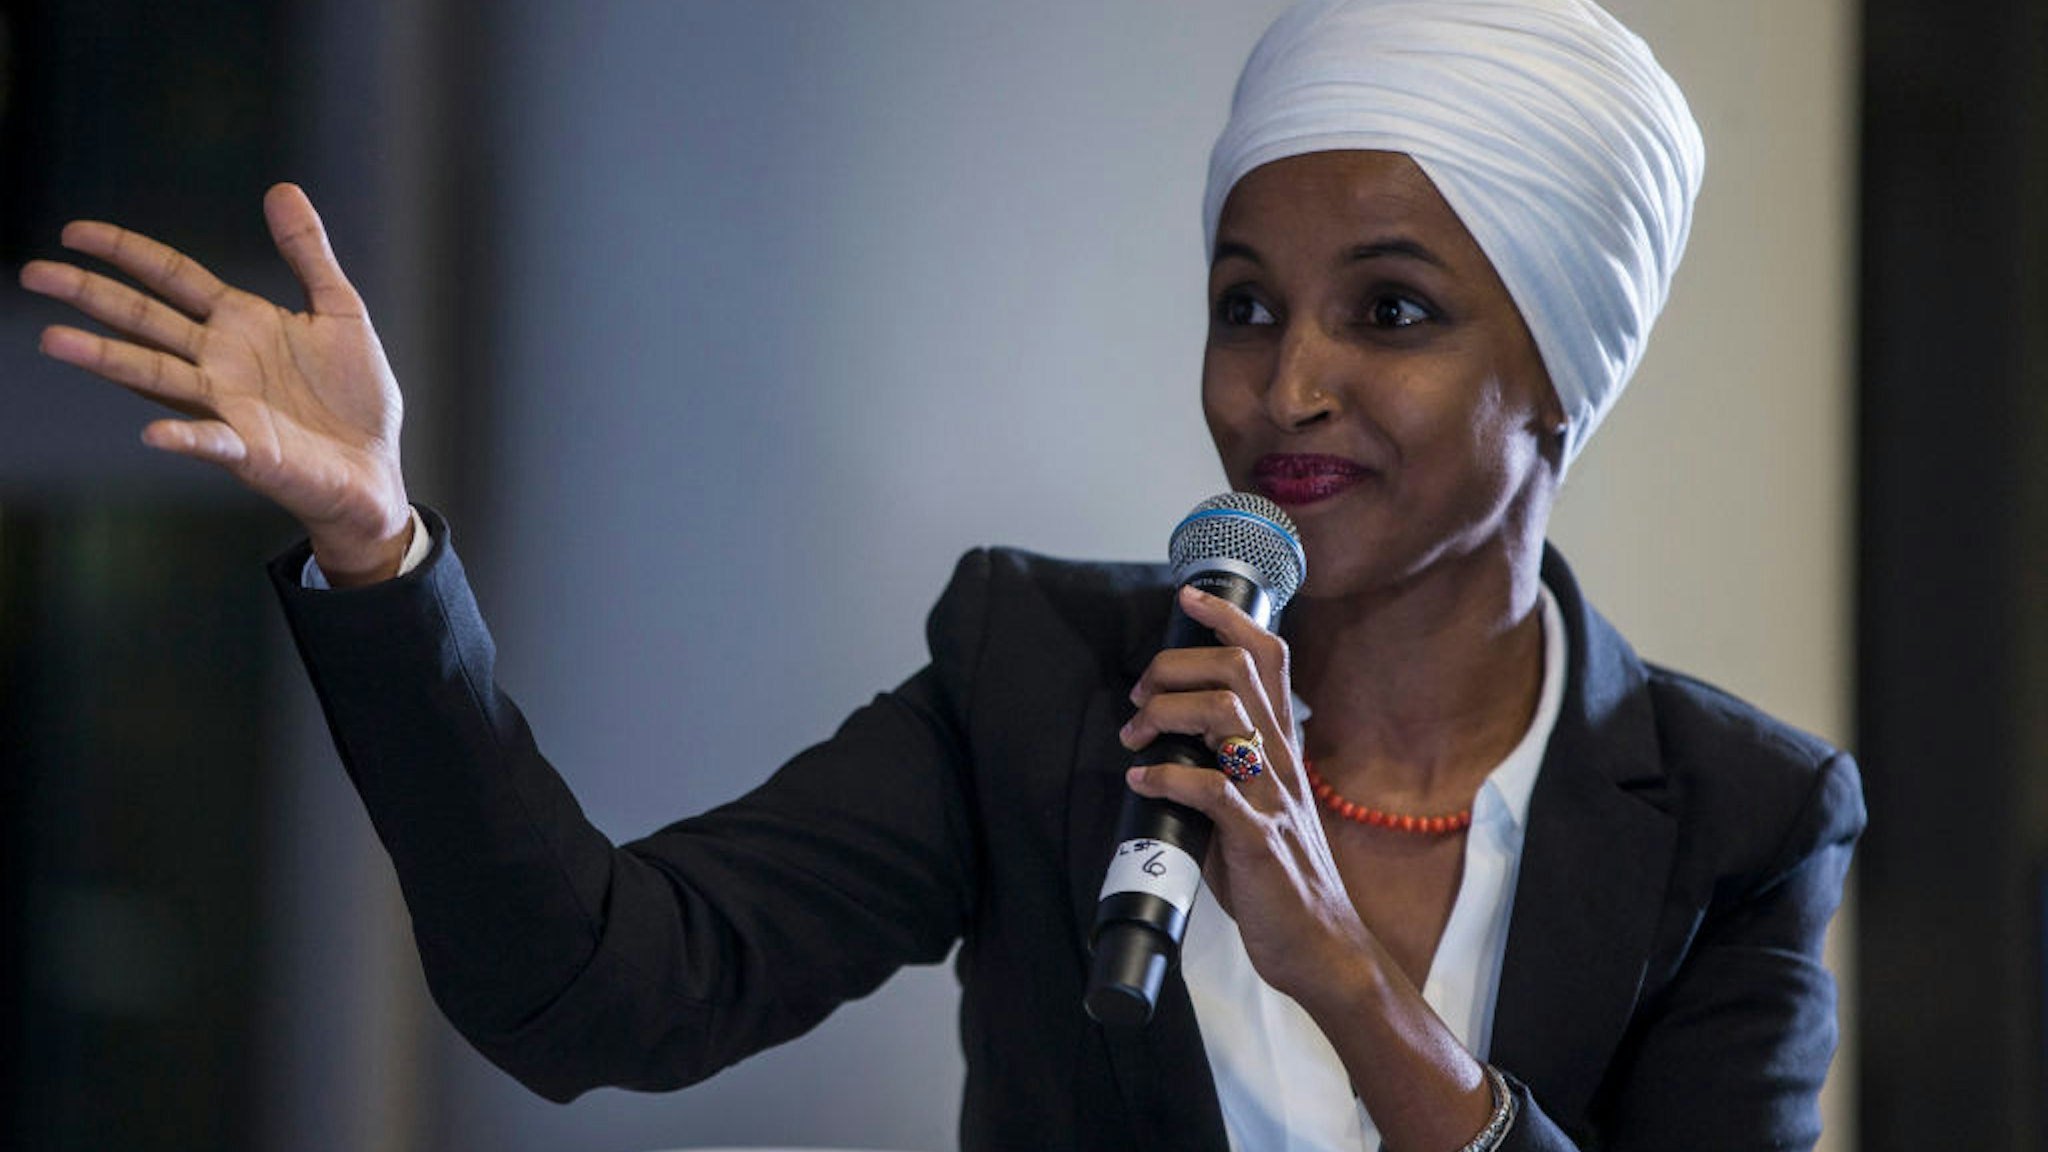 WASHINGTON, DC - SEPTEMBER 11: Rep. Ilhan Omar (D-MN) speaks during a town hall hosted by the NAACP on September 11, 2019 in Washington, DC. The congresswomen talked about their backgrounds and how they were disruptors who “challenged conventional wisdom and assumptions” about how to get elected, among other topics.